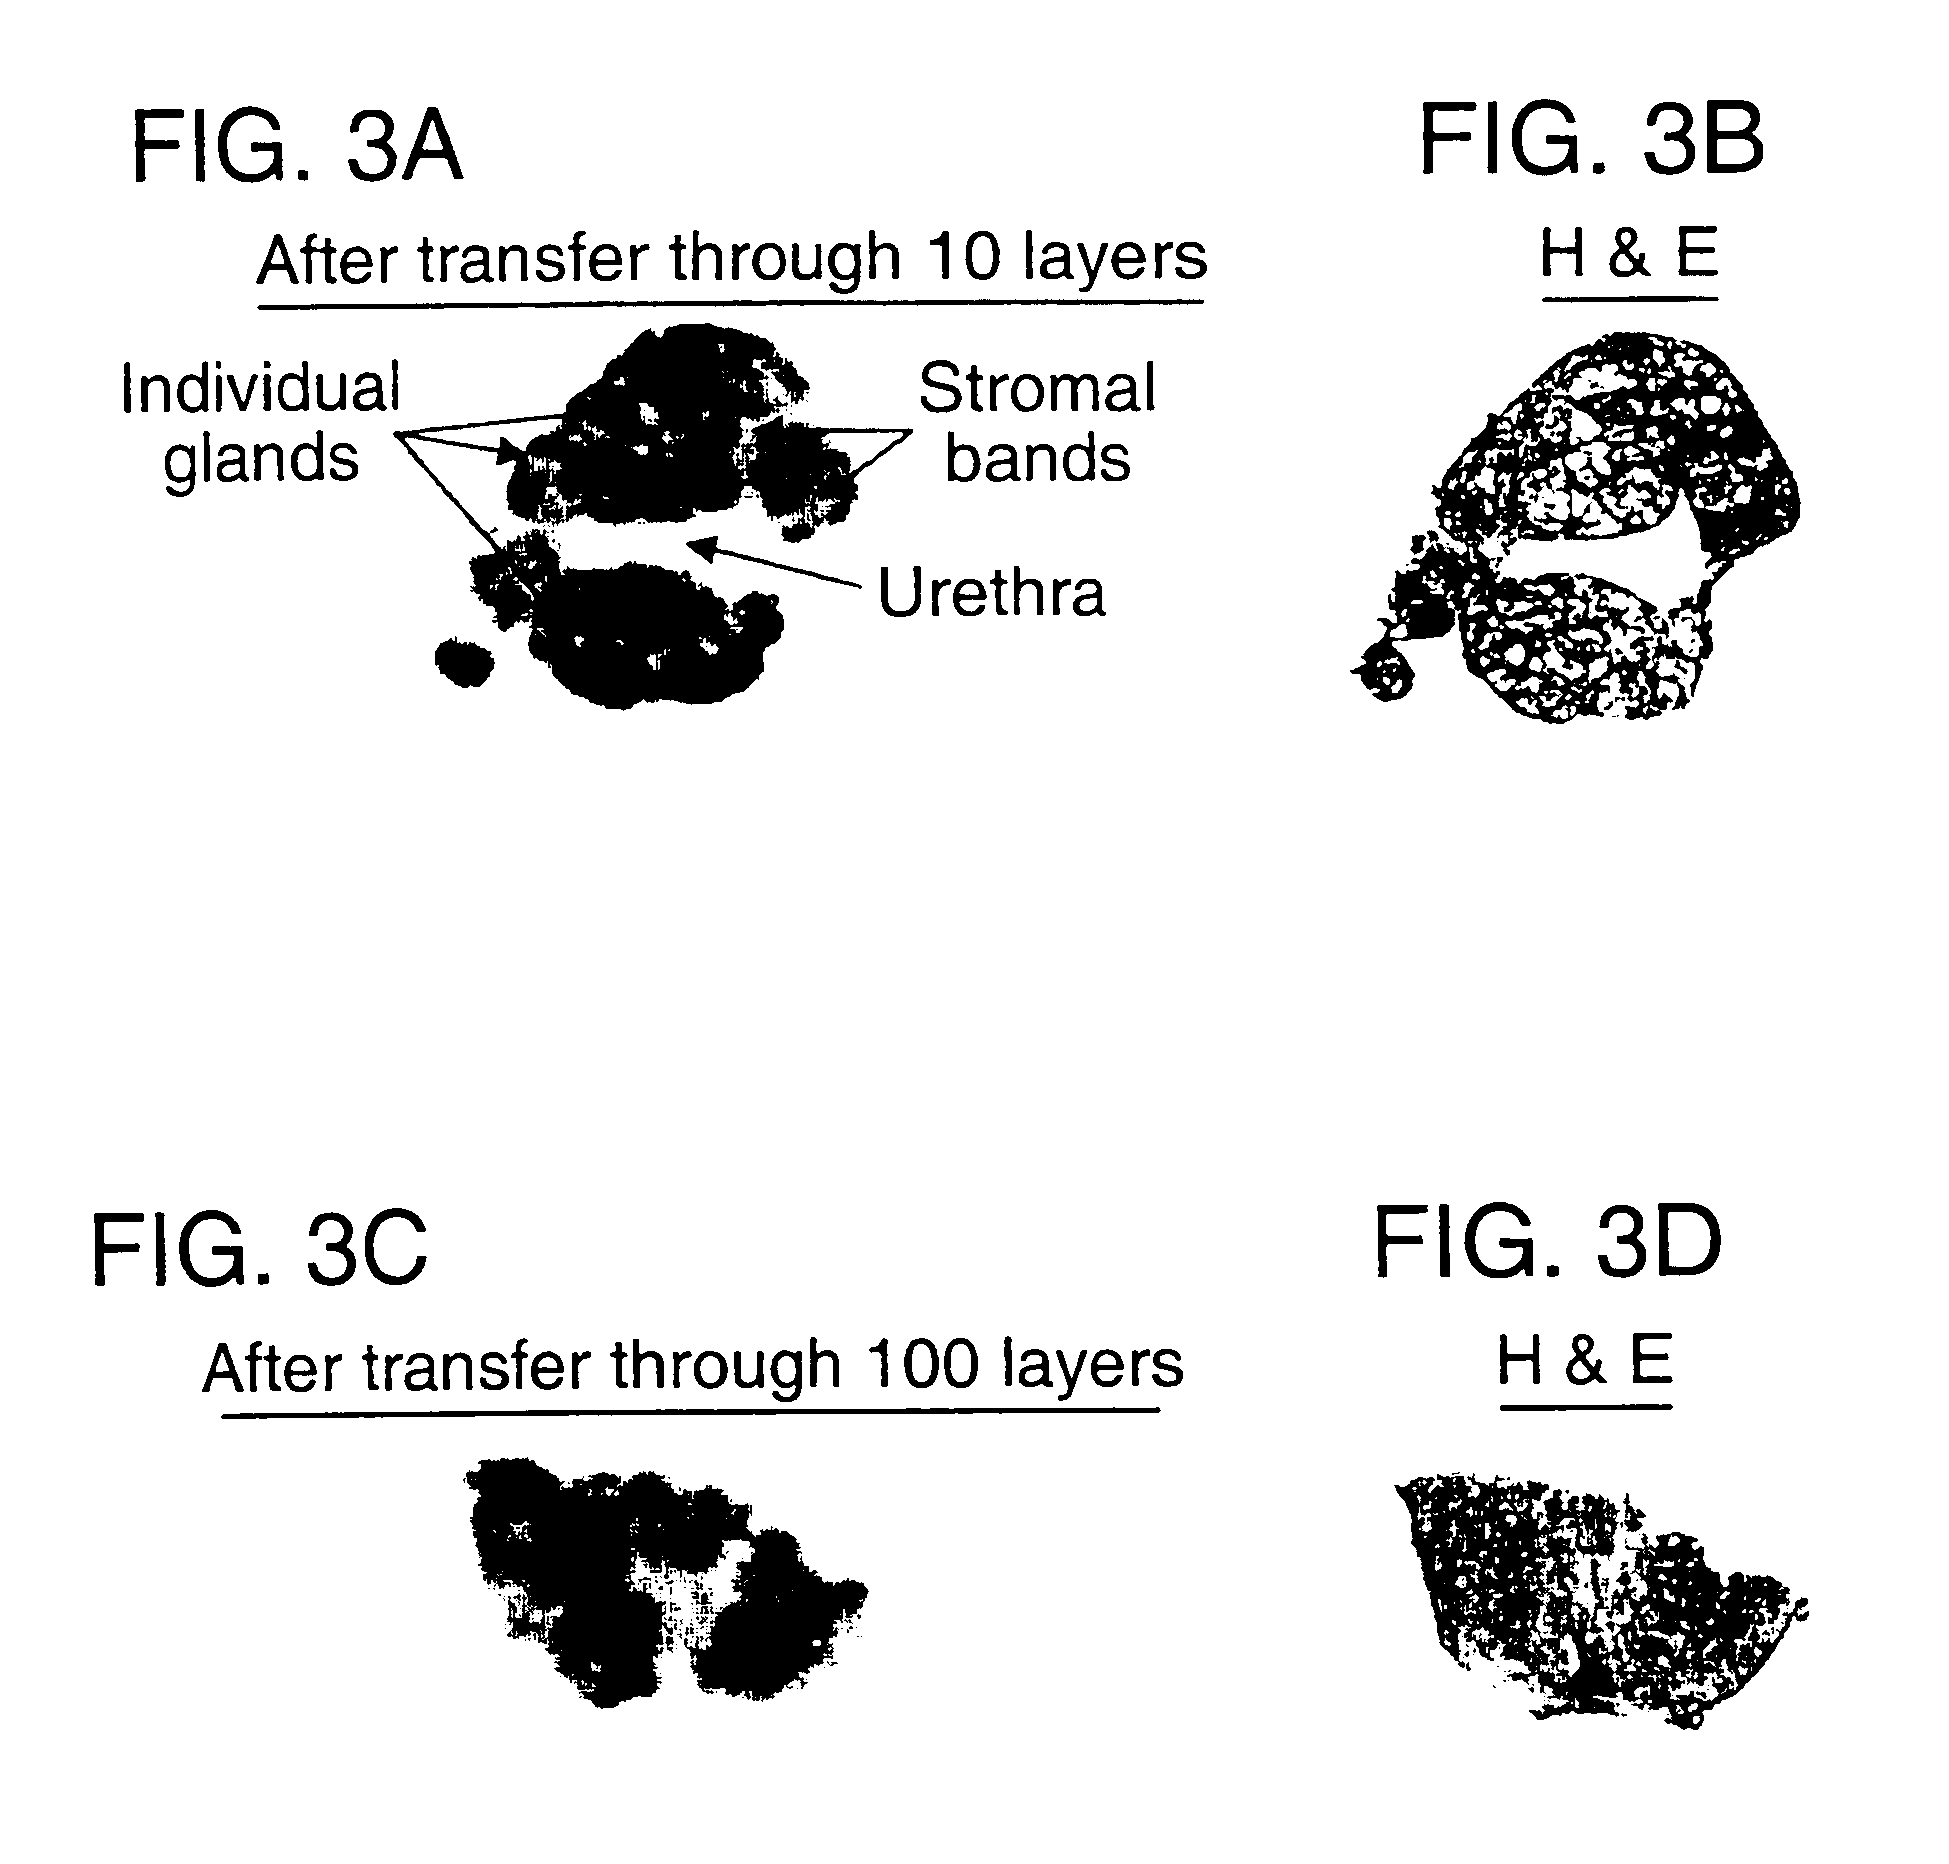 Layered device with capture regions for cellular analysis